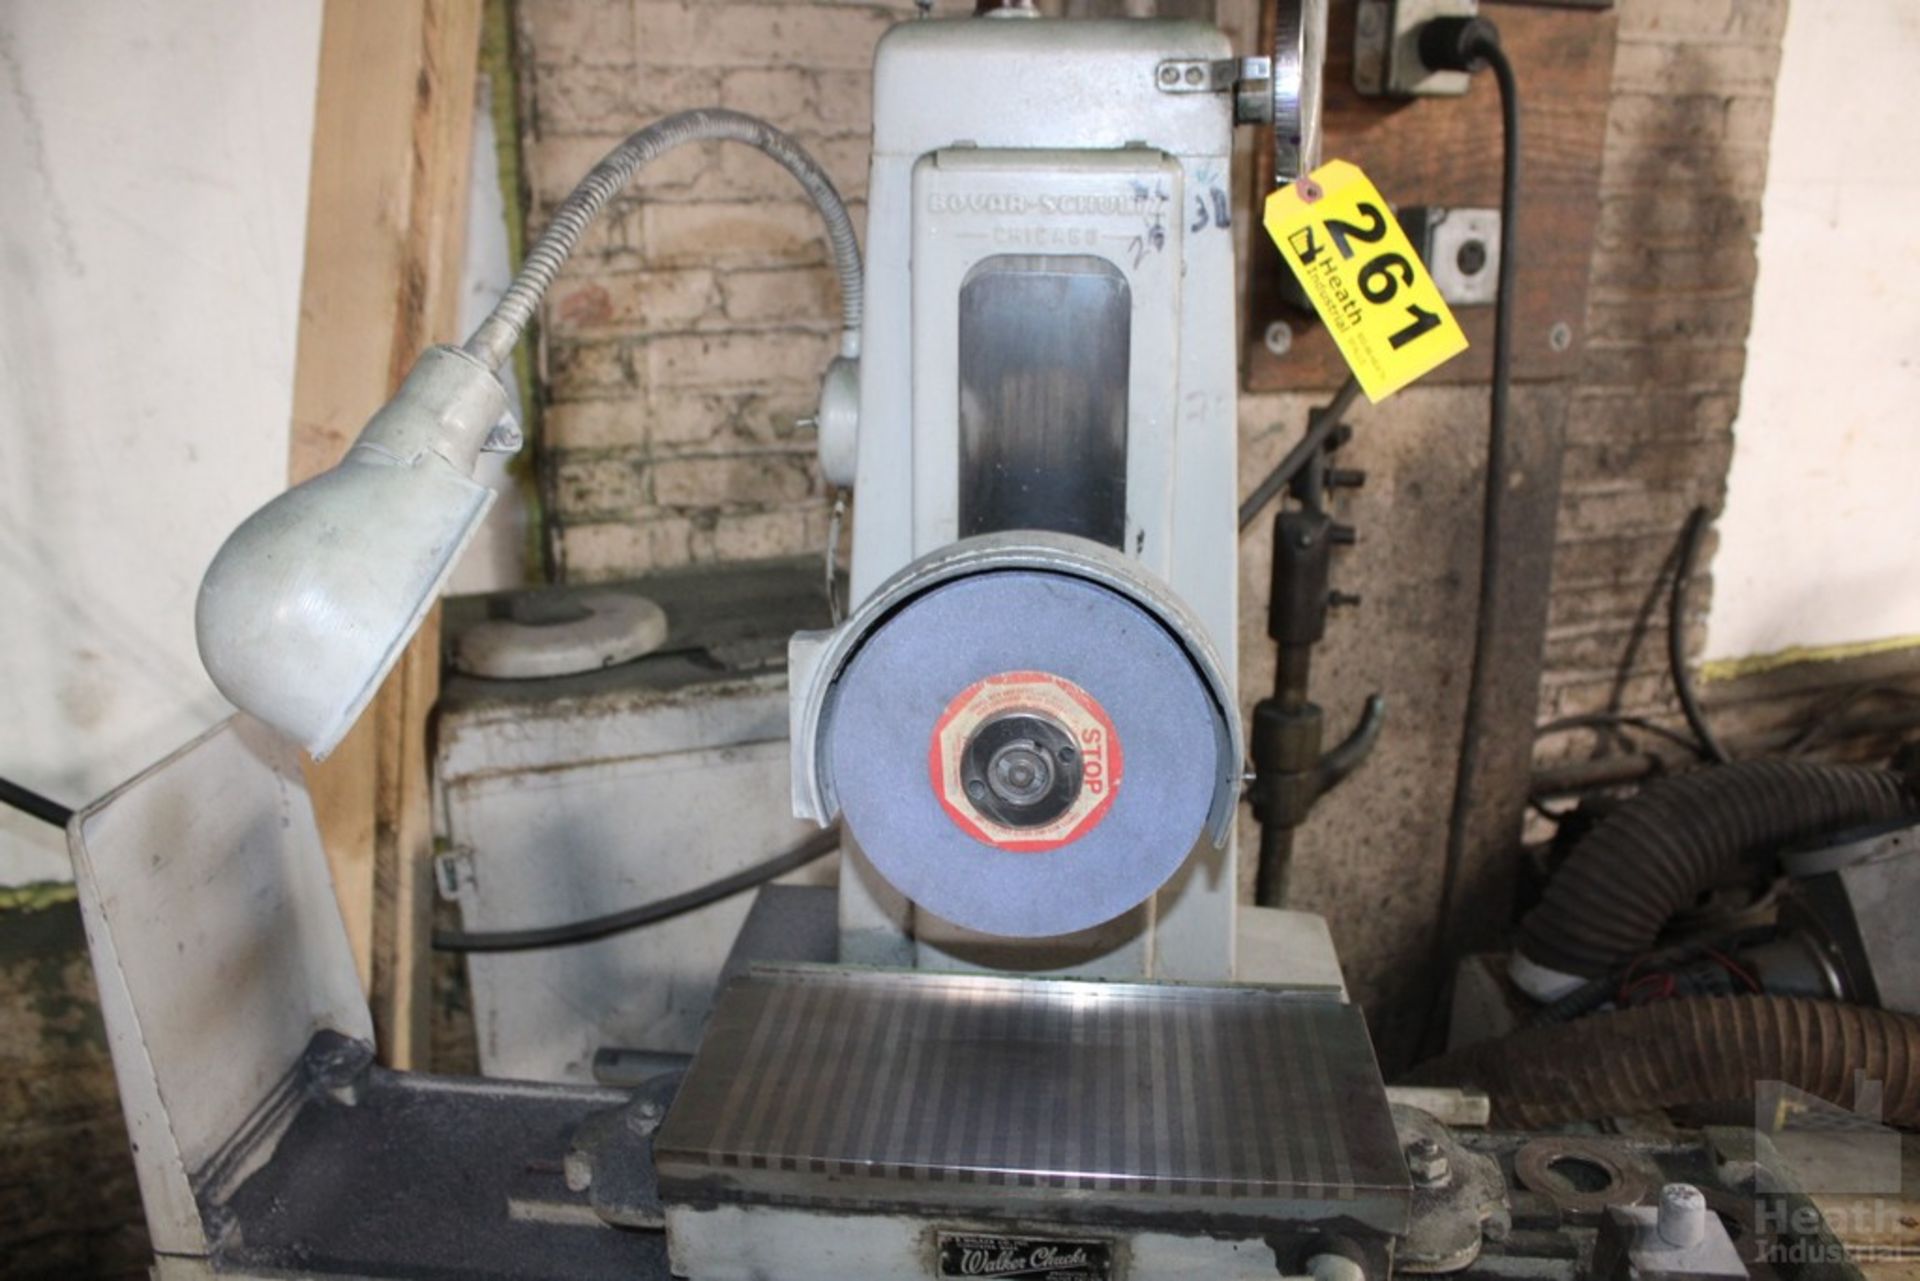 BOYAR SCHULTZ 6"x12" MODEL 612 SURFACE GRINDER, S/N 11670, WITH PERMANENT MAGNETIC CHUCK - Image 2 of 4